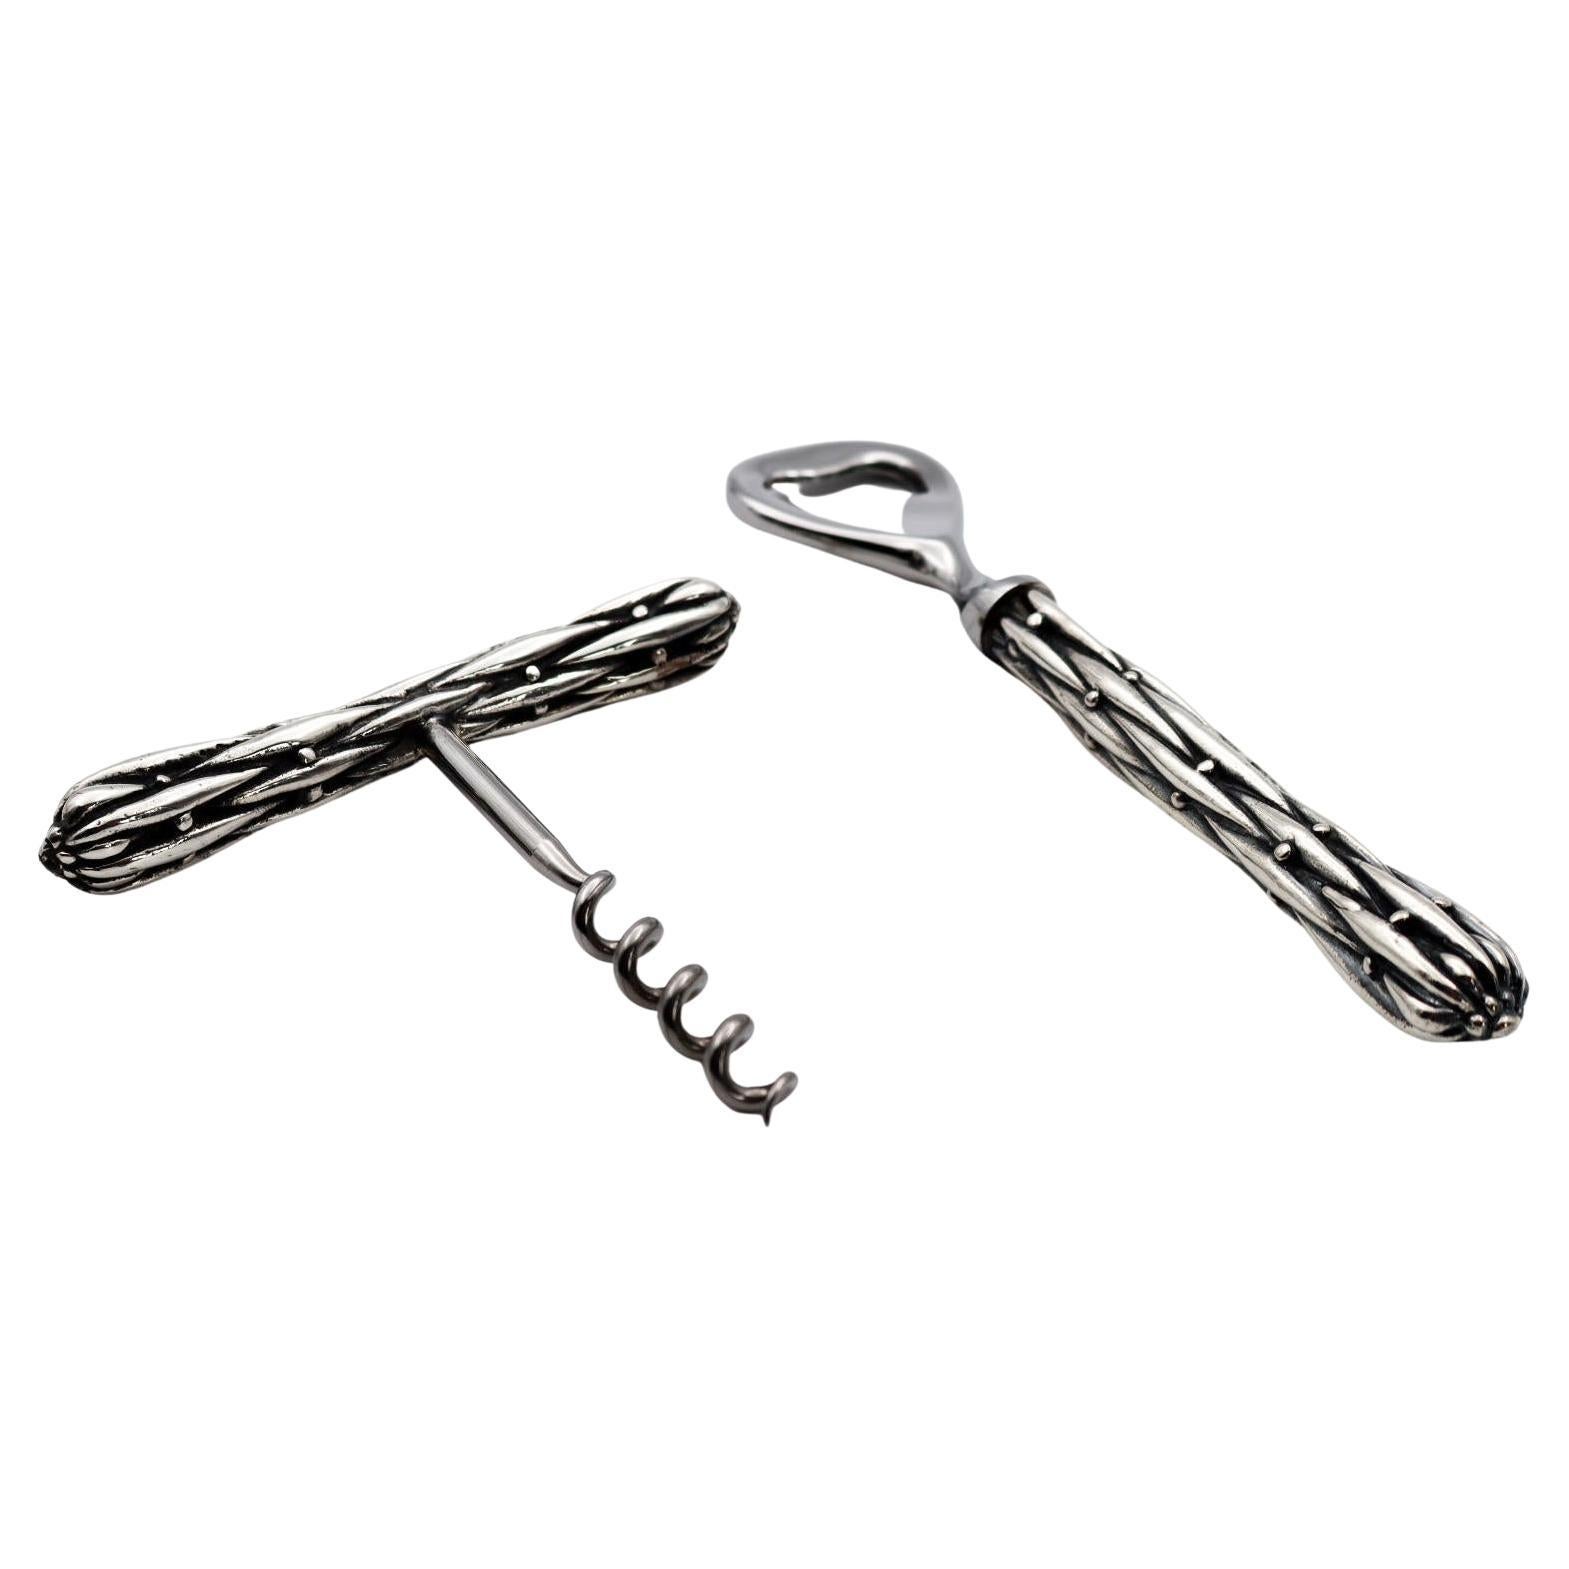 Bottle Opener and Corkscrew For Sale